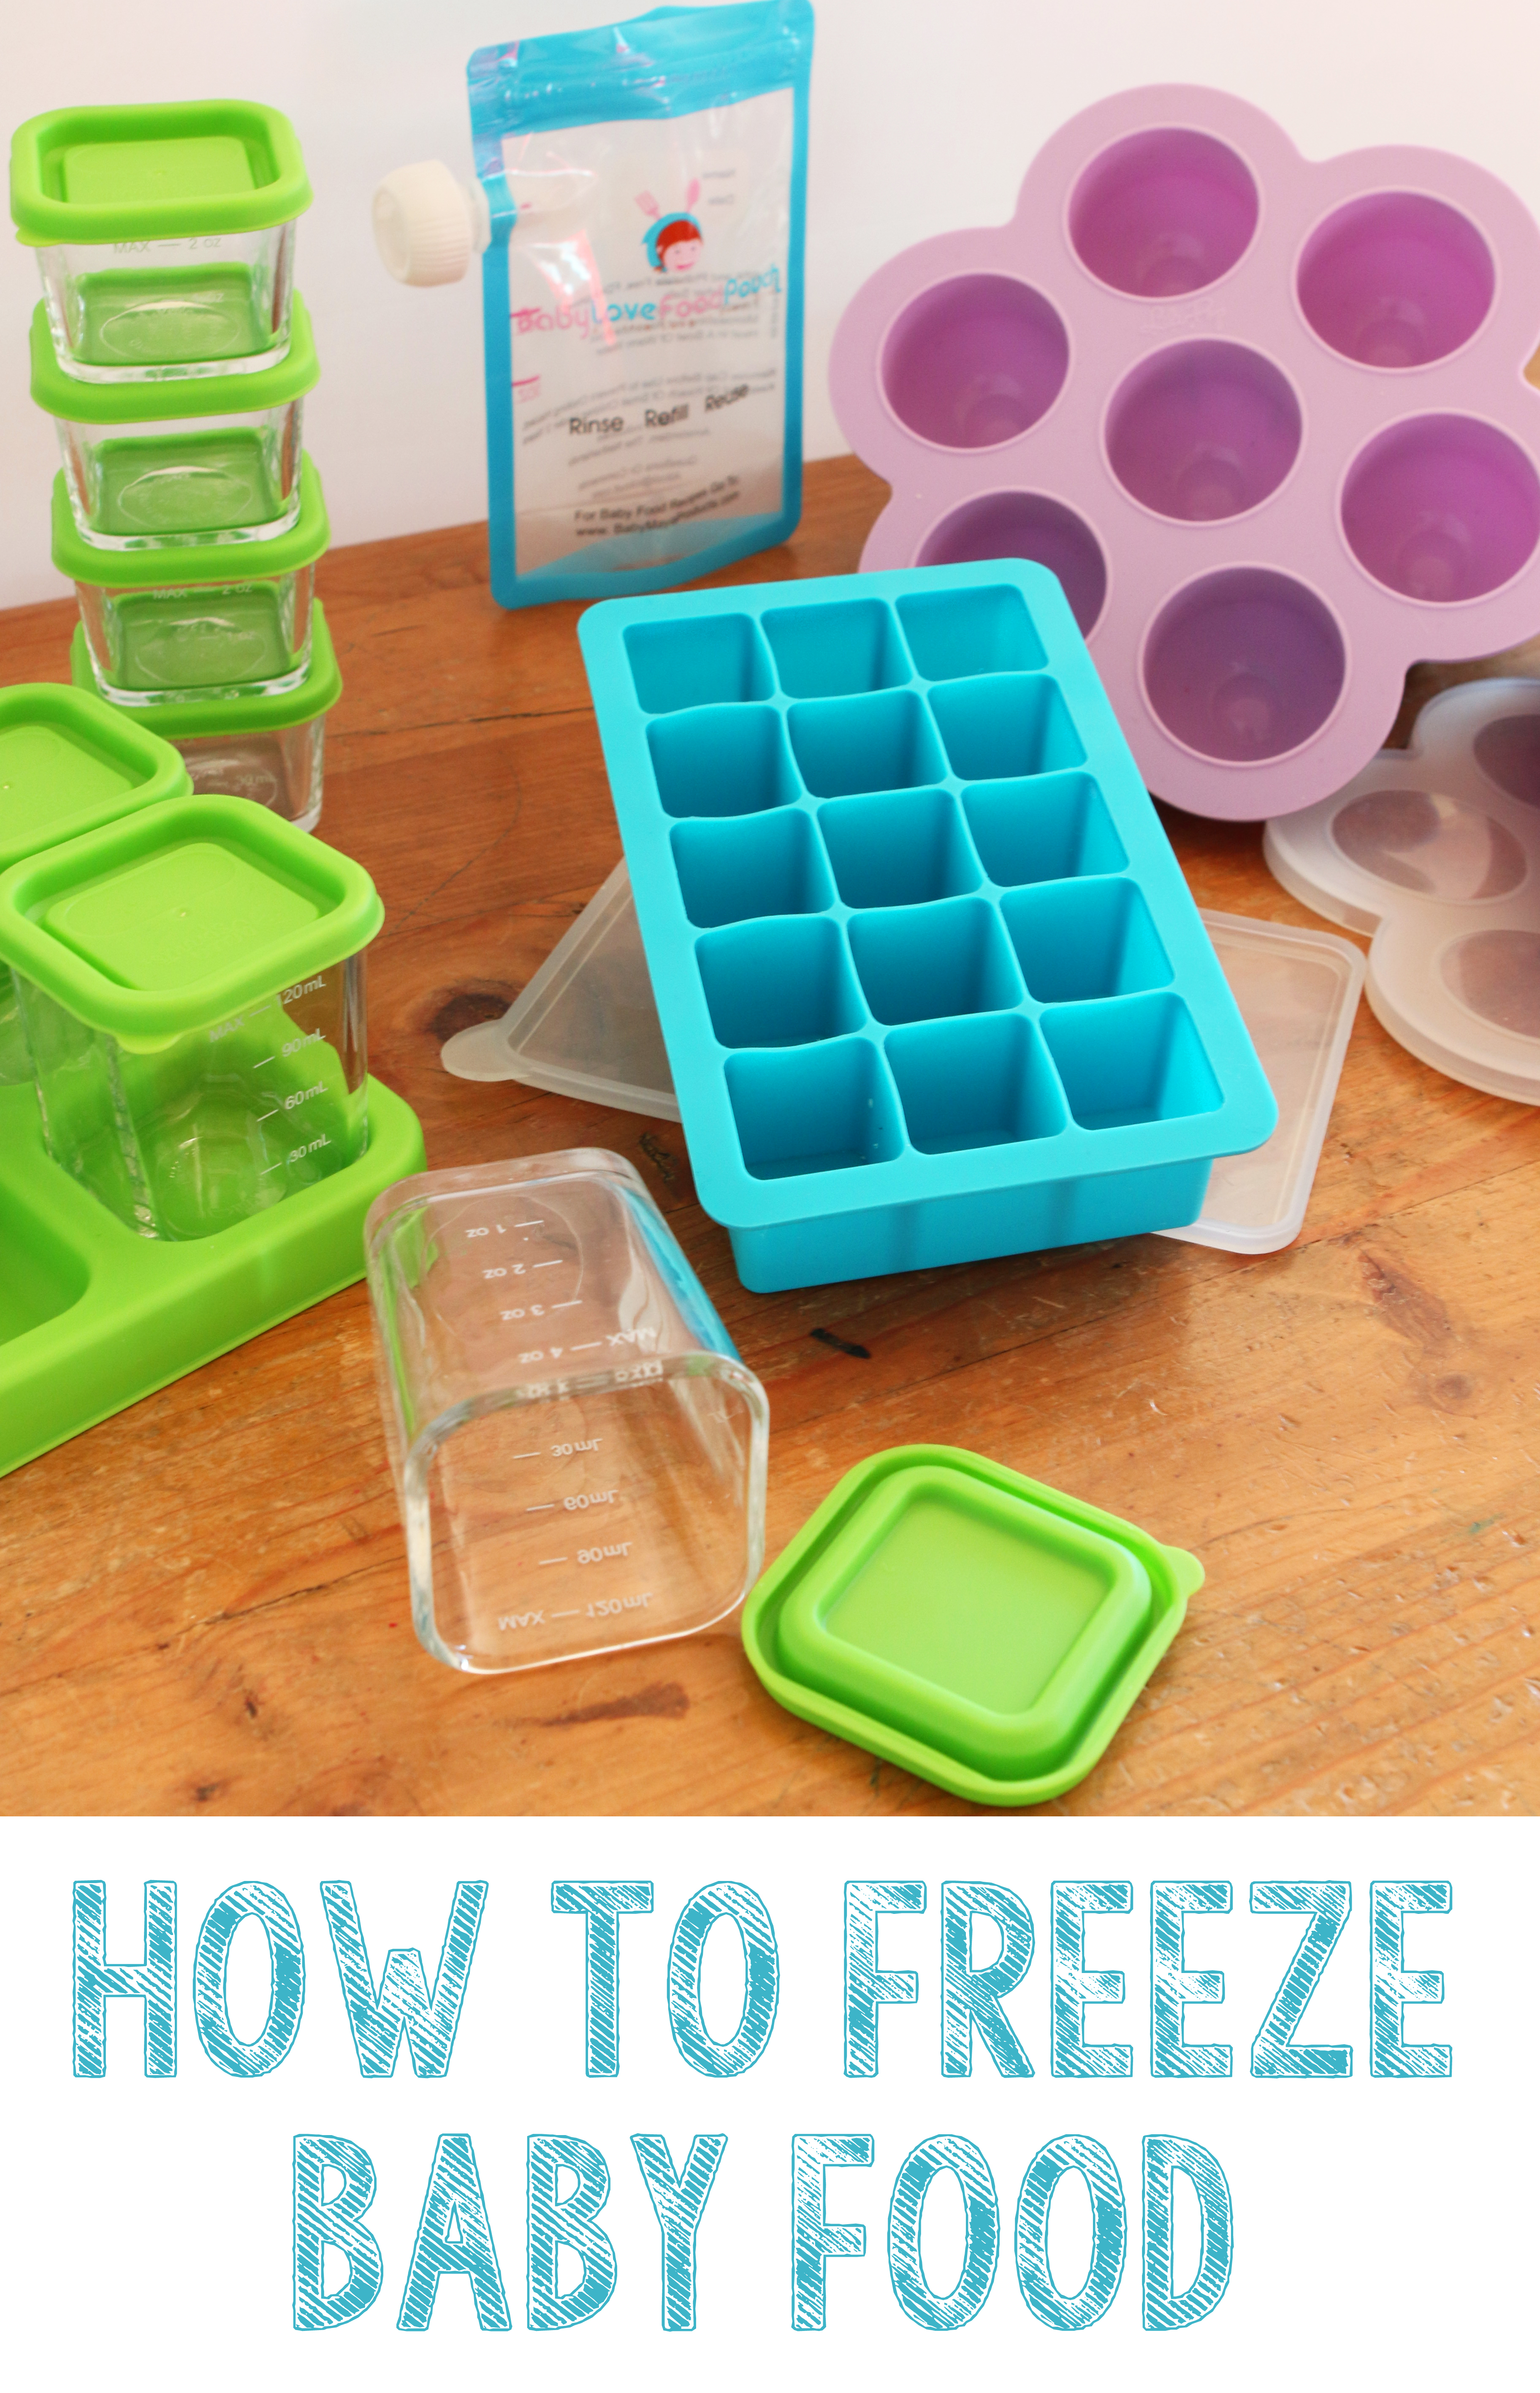 Baby Food Storage: Tips on Freezing and Best Containers